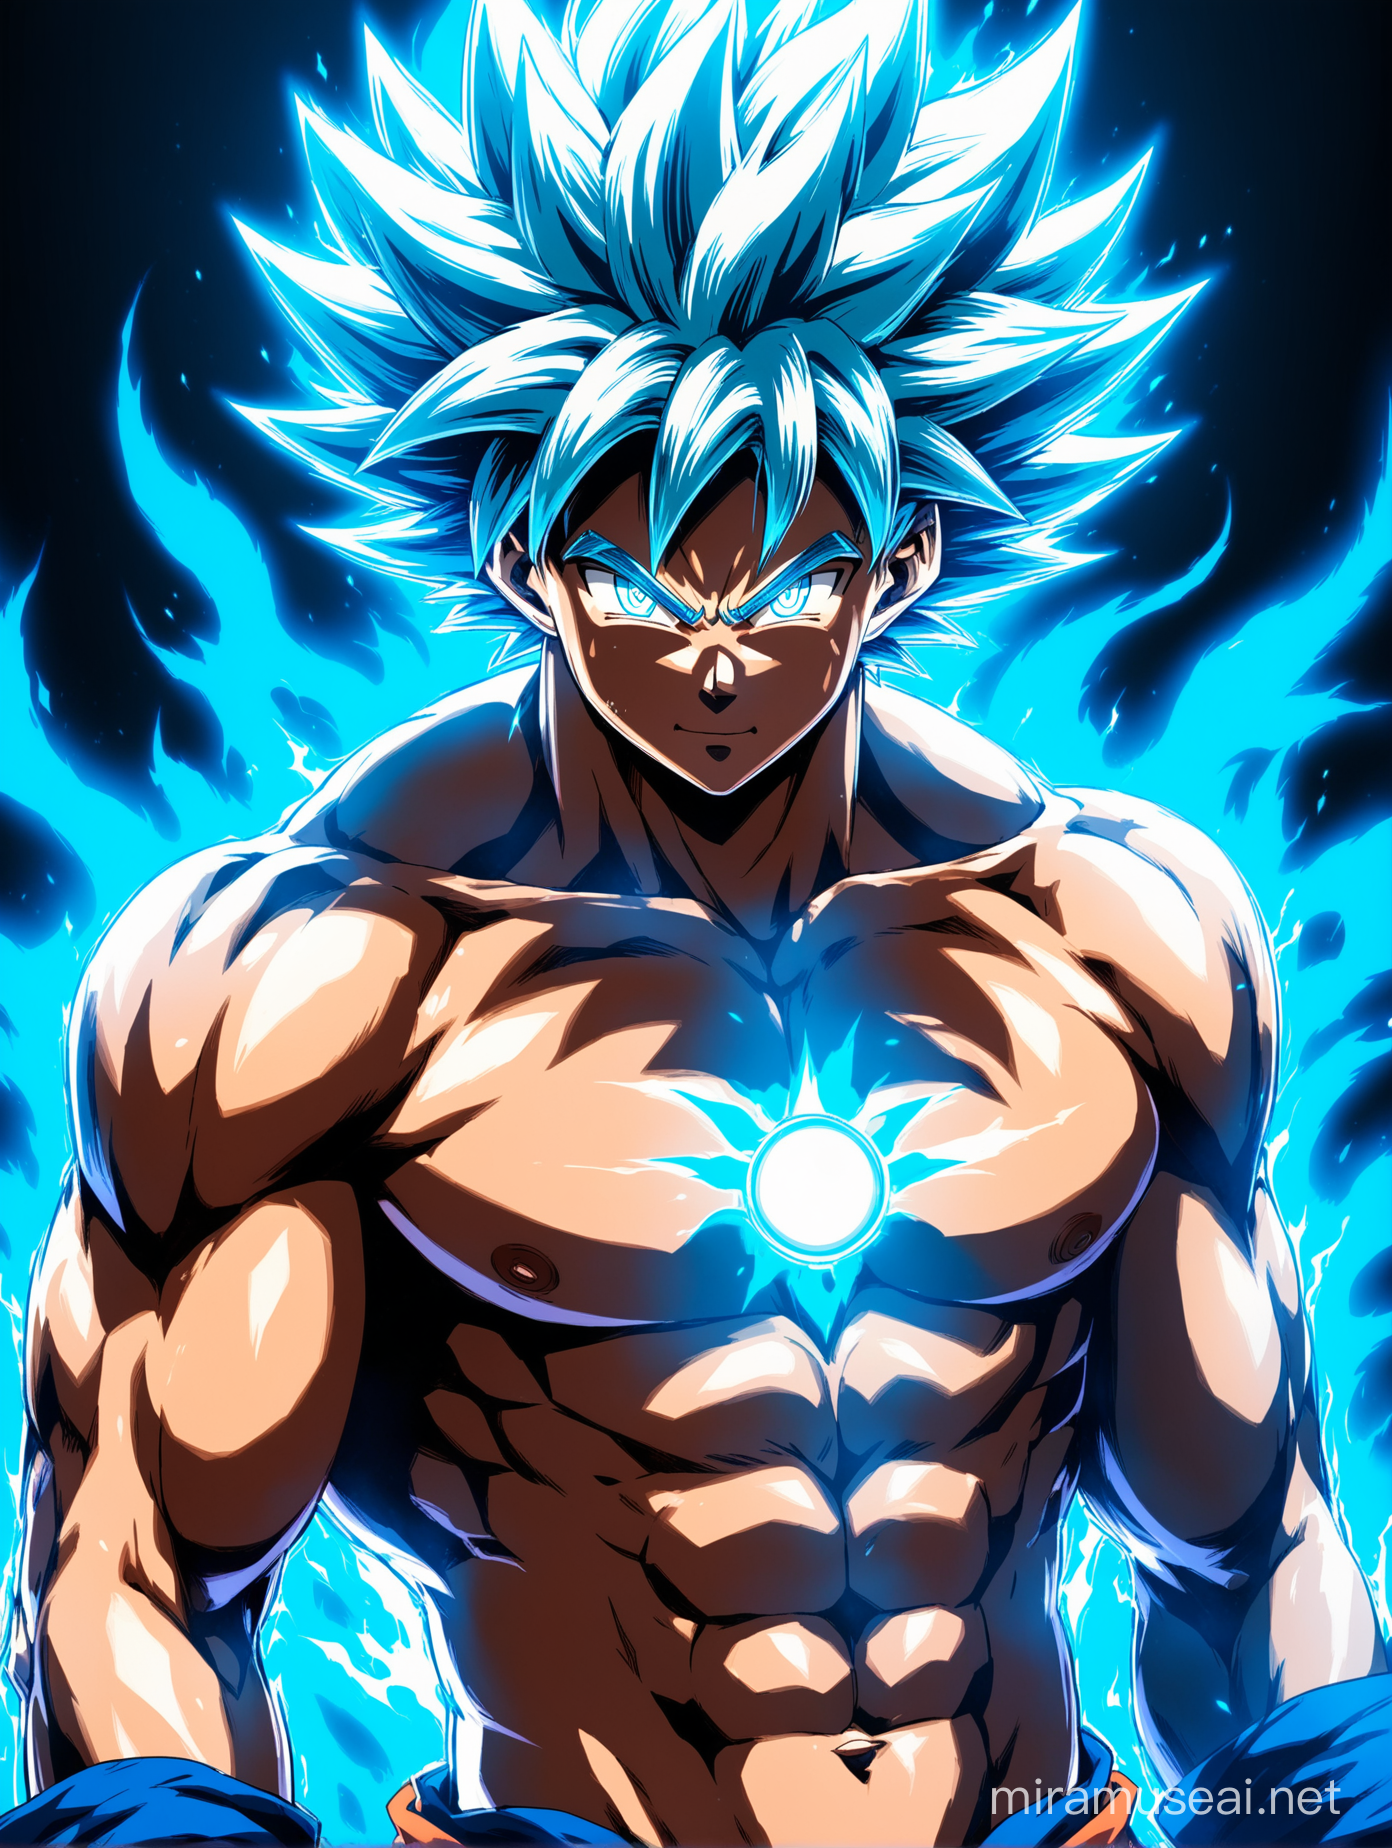 Shirtless Goku With a new Blue-Cyan transformation with strong ultra Blue-Cyan lighting aura, he's lean and vascular, he has white hair only no other colors, side view